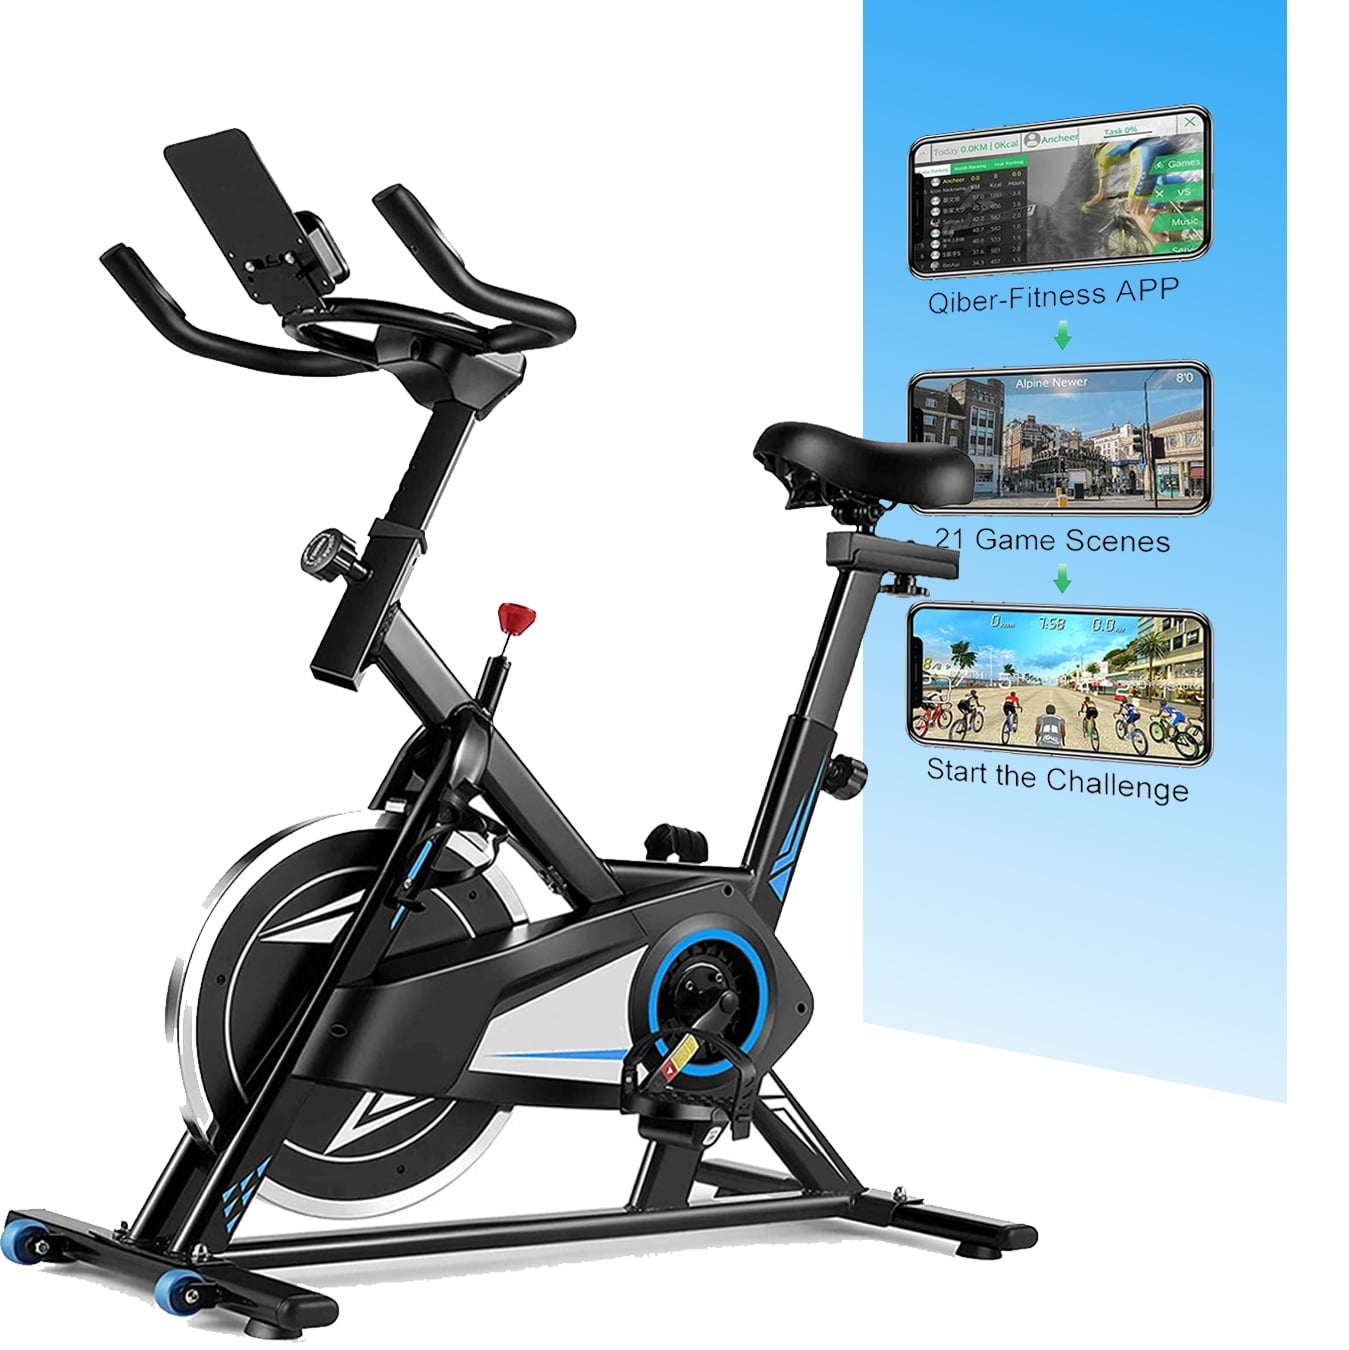 Details about   ANCHEER Stationary Exercise Bike Cycling Bike Indoor Belt Drive w/APP Function 